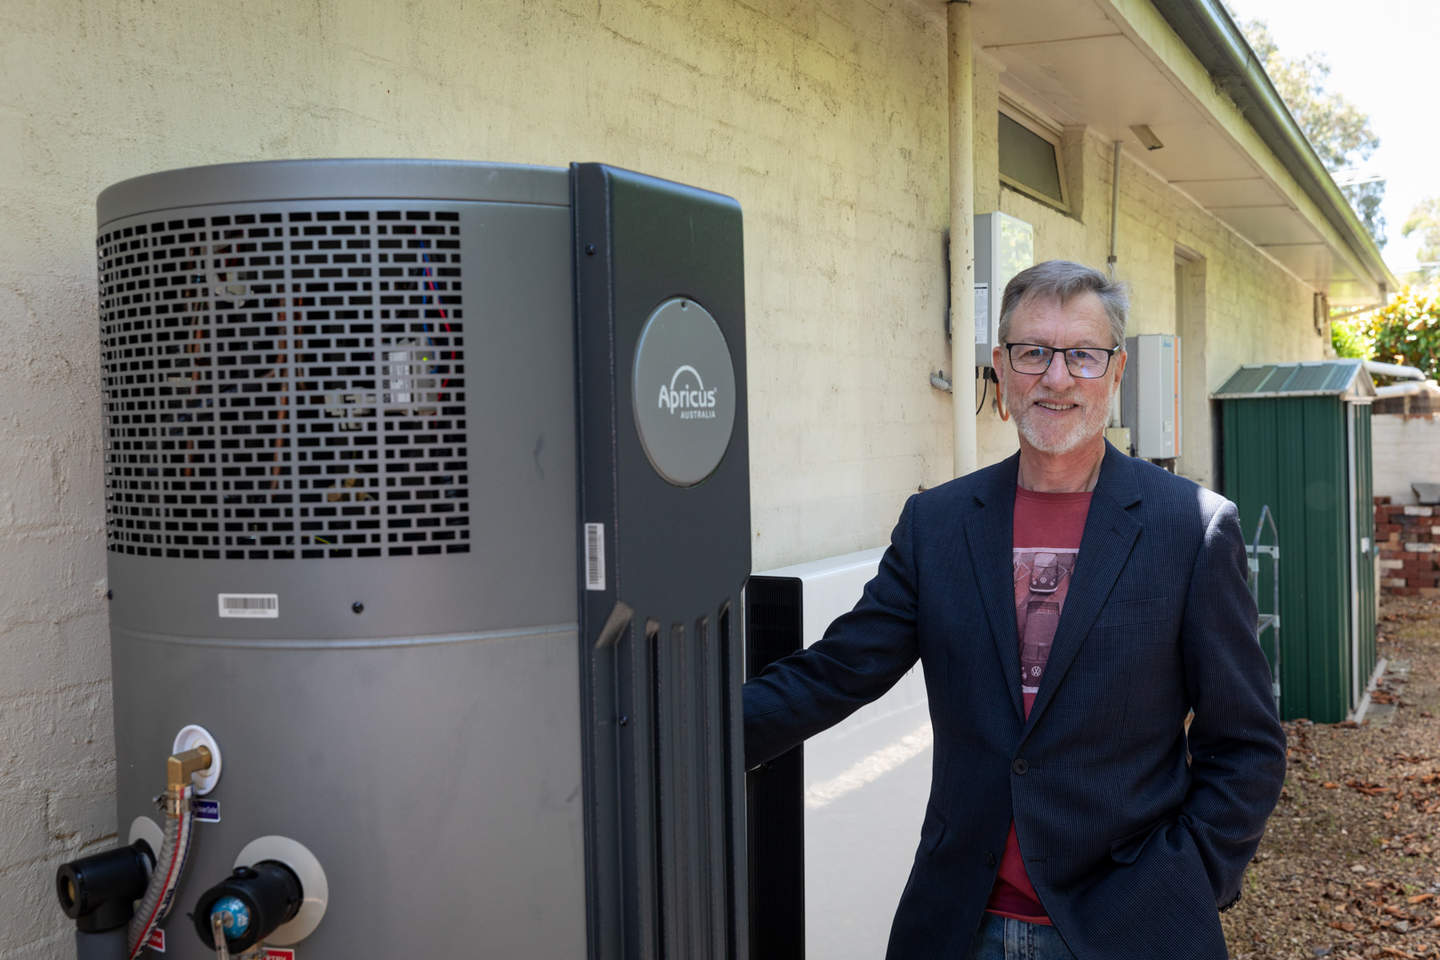 Bayside resident Kris stands next to his hot water heat pump